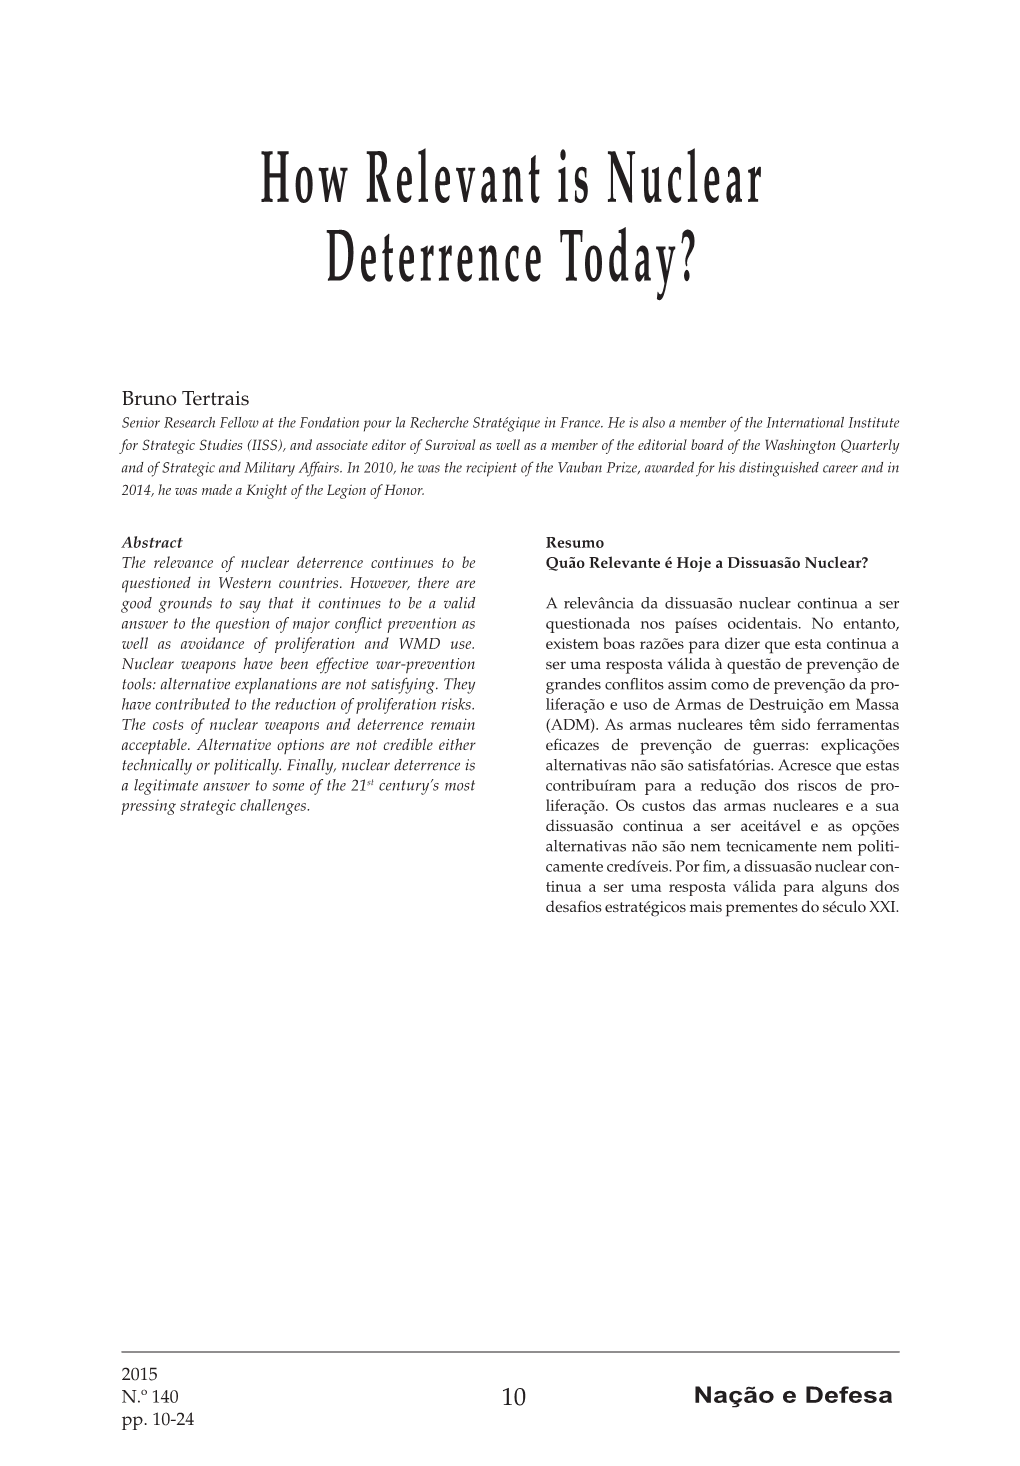 How Relevant Is Nuclear Deterrence Today?